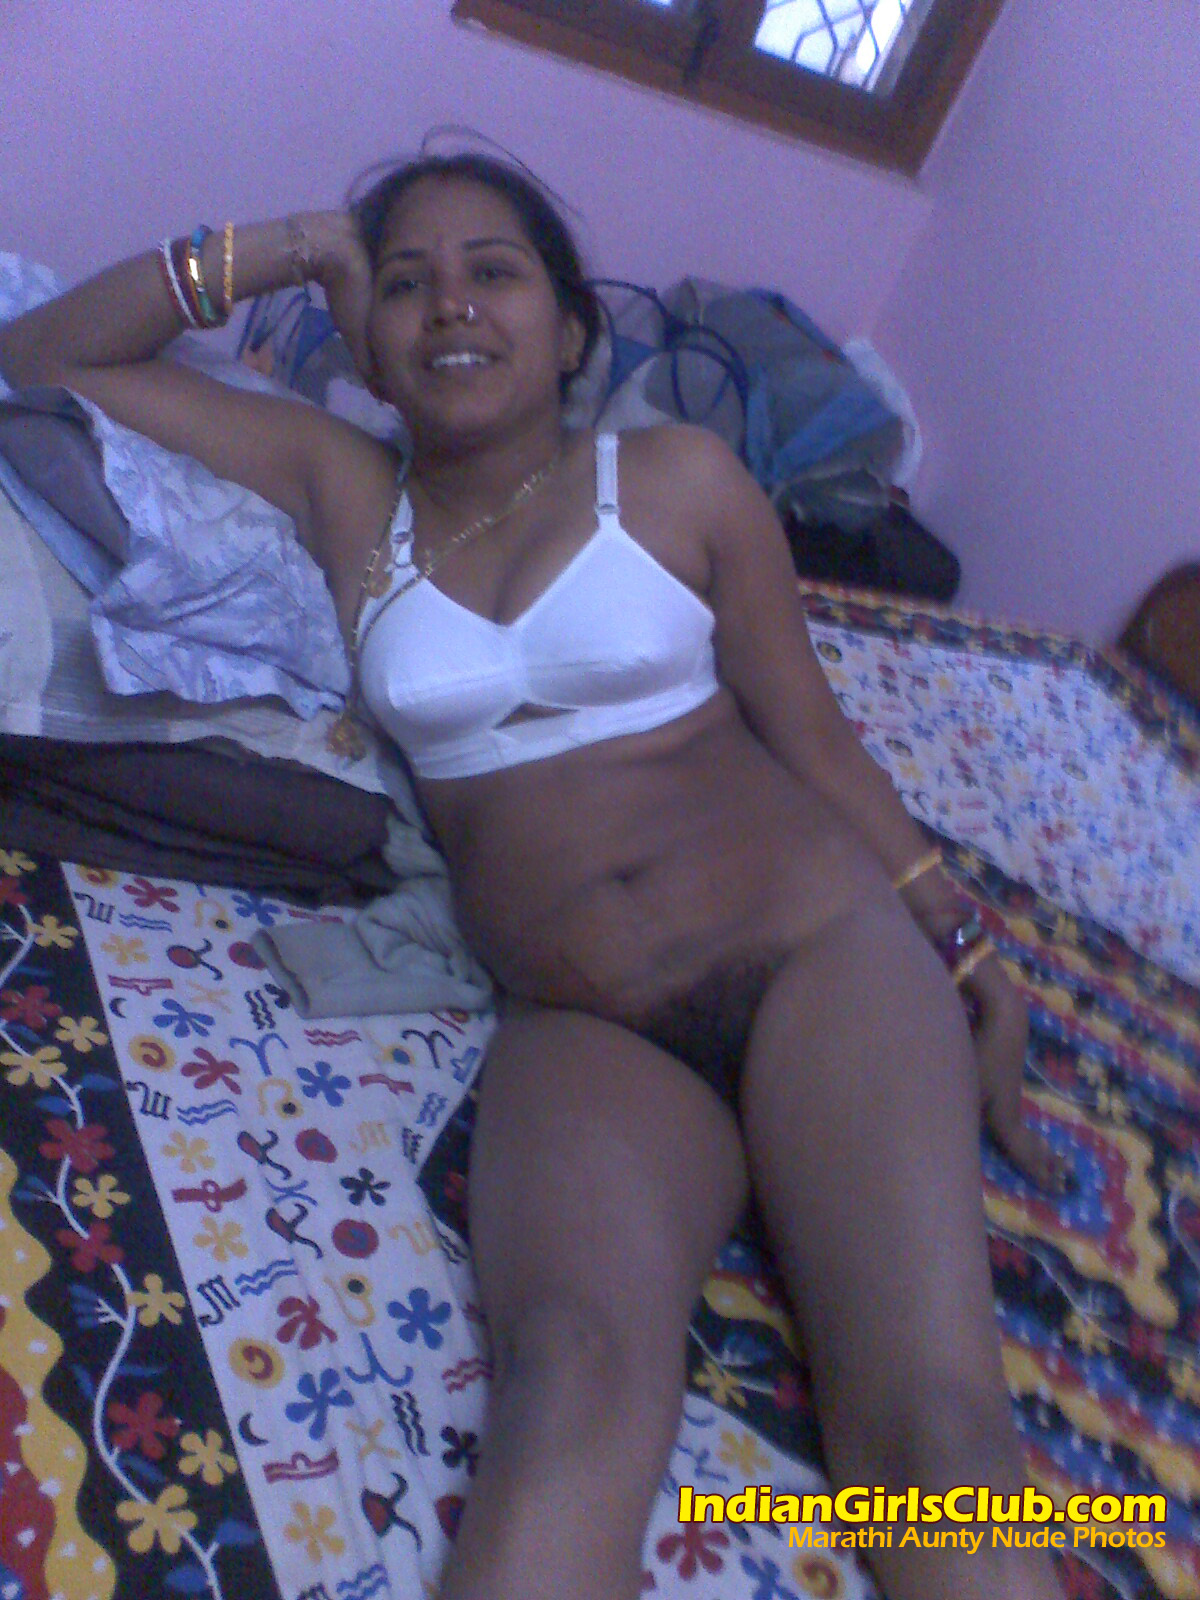 Mom Porn Story In Marathi - Marathi women nude show - Sex Quality image 100% free. Comments: 1